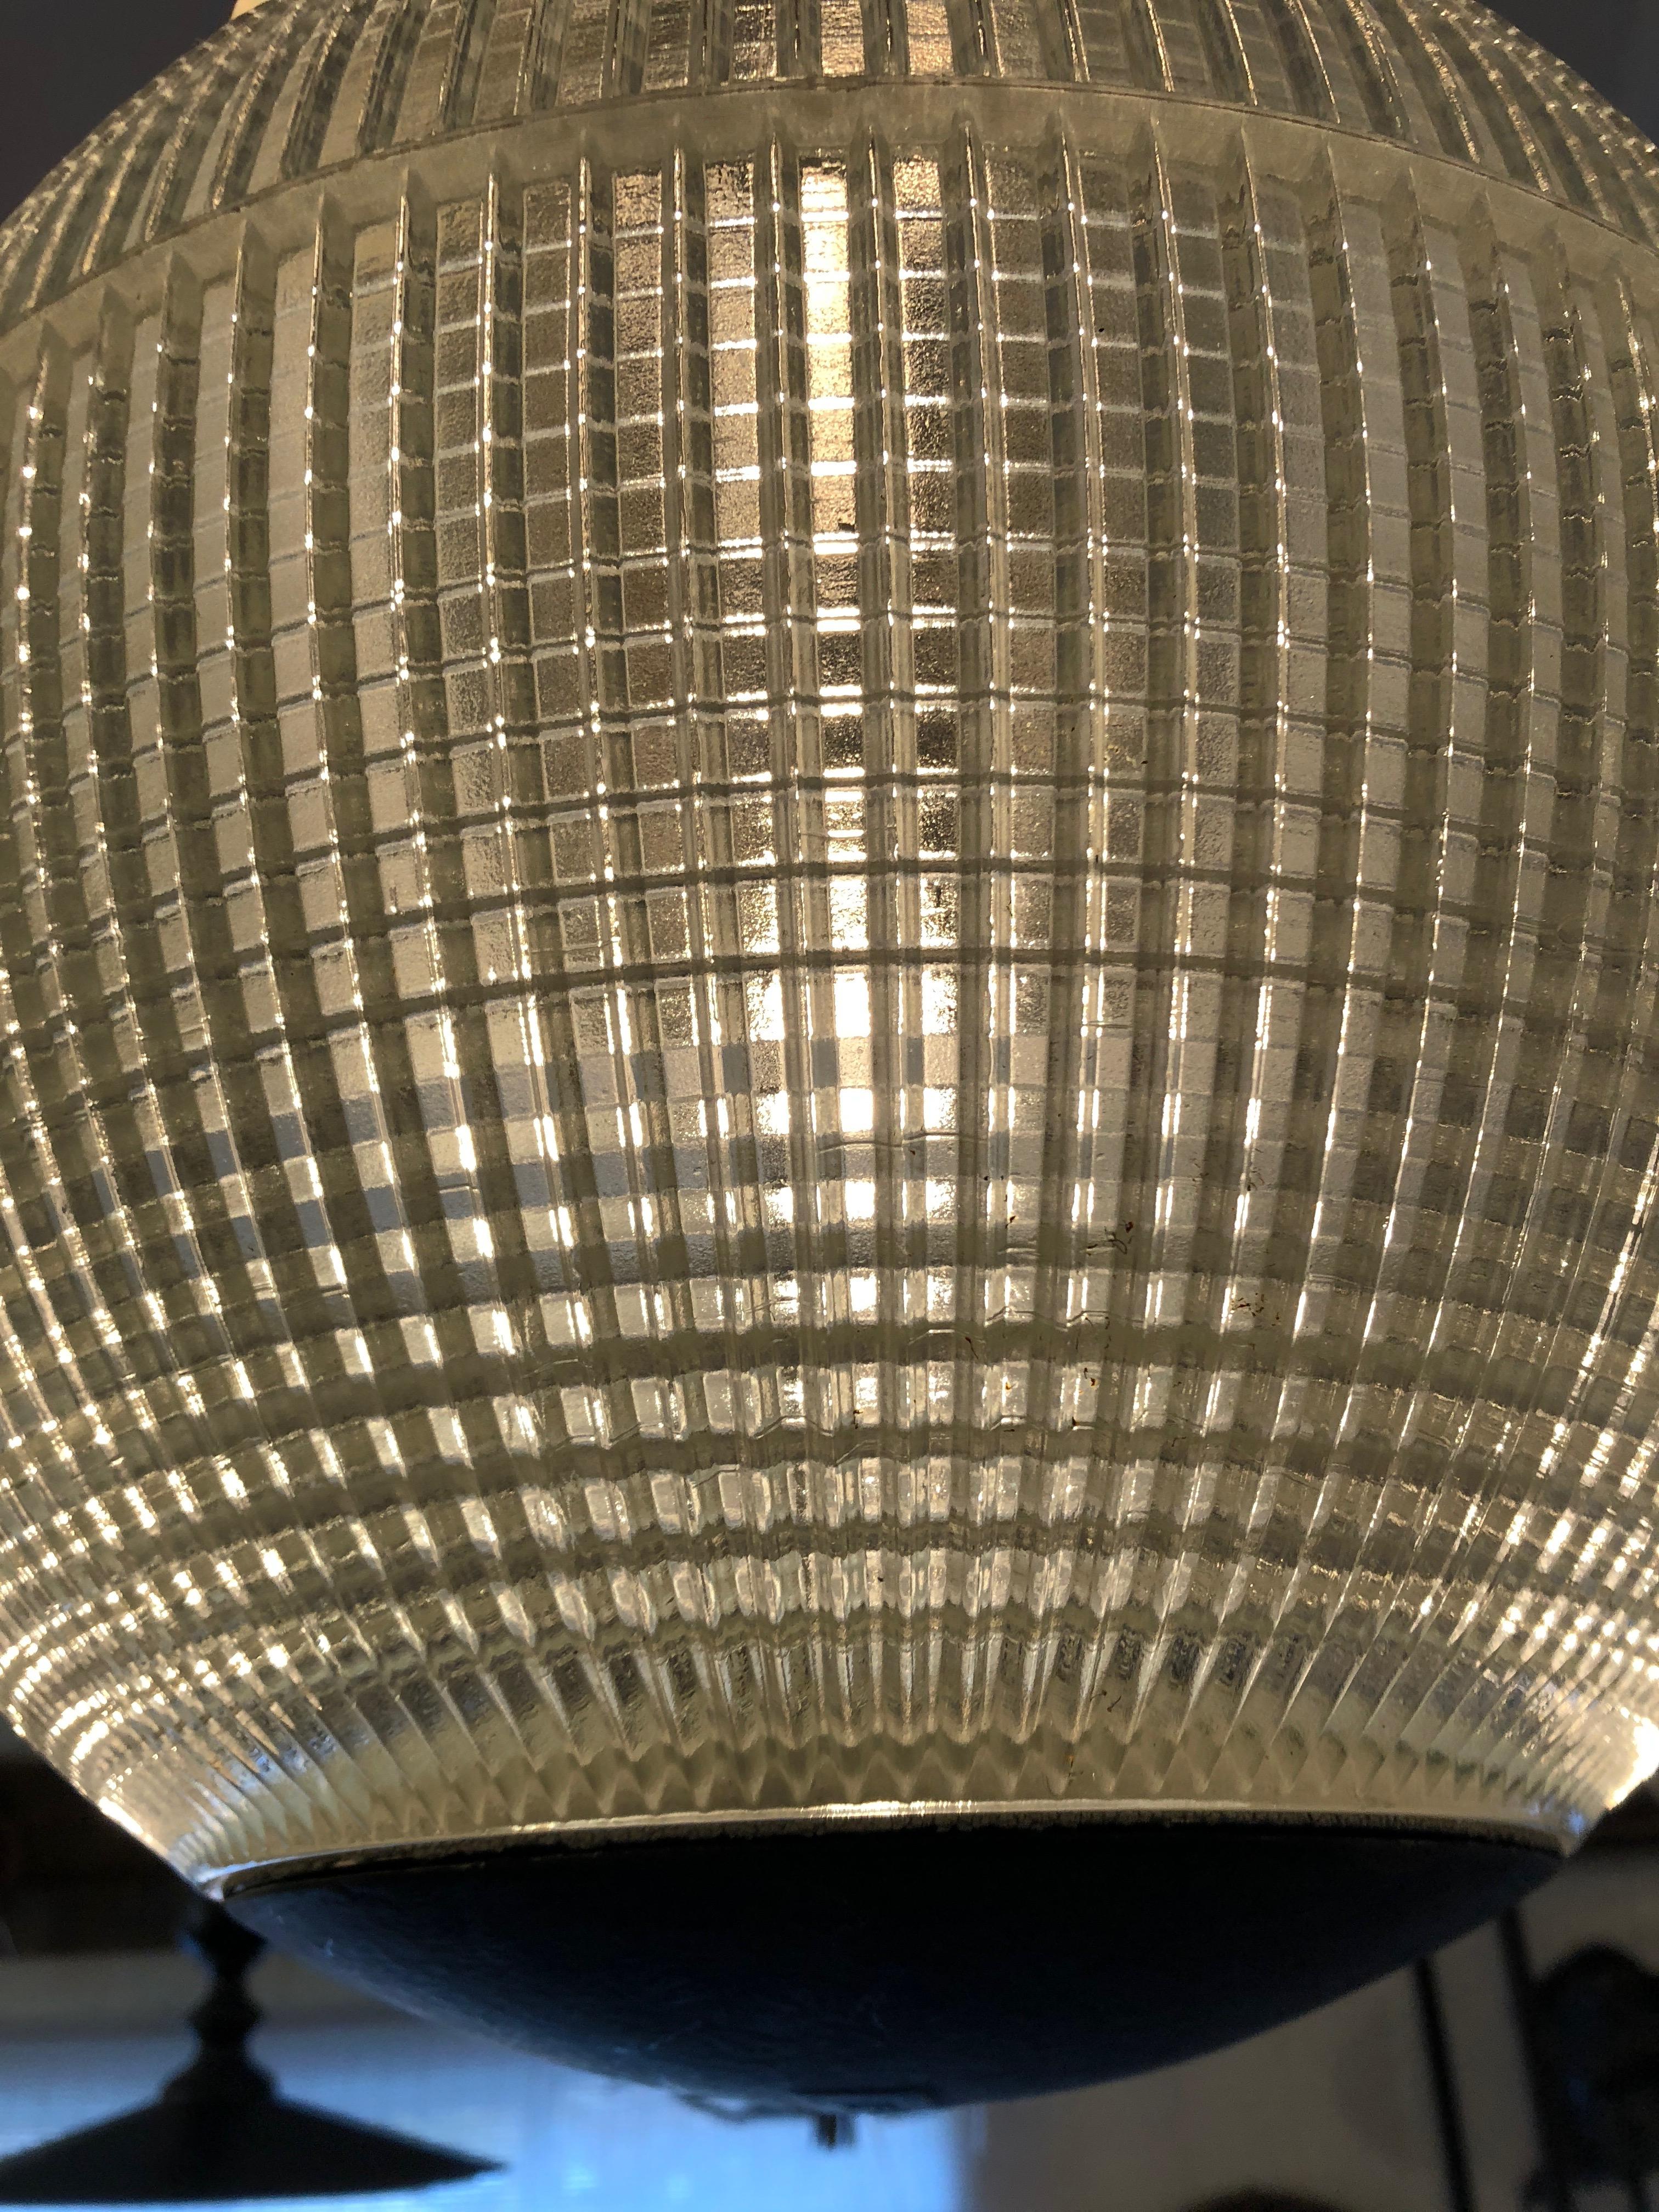 Fabulously glamorous pair of globe like holophane pendants made from Parisian streetlights. The hallmark of holophane luminaires or lighting fixtures, is the borosilicate glass reflector or refractor. The glass prisms or ribs provide a combination